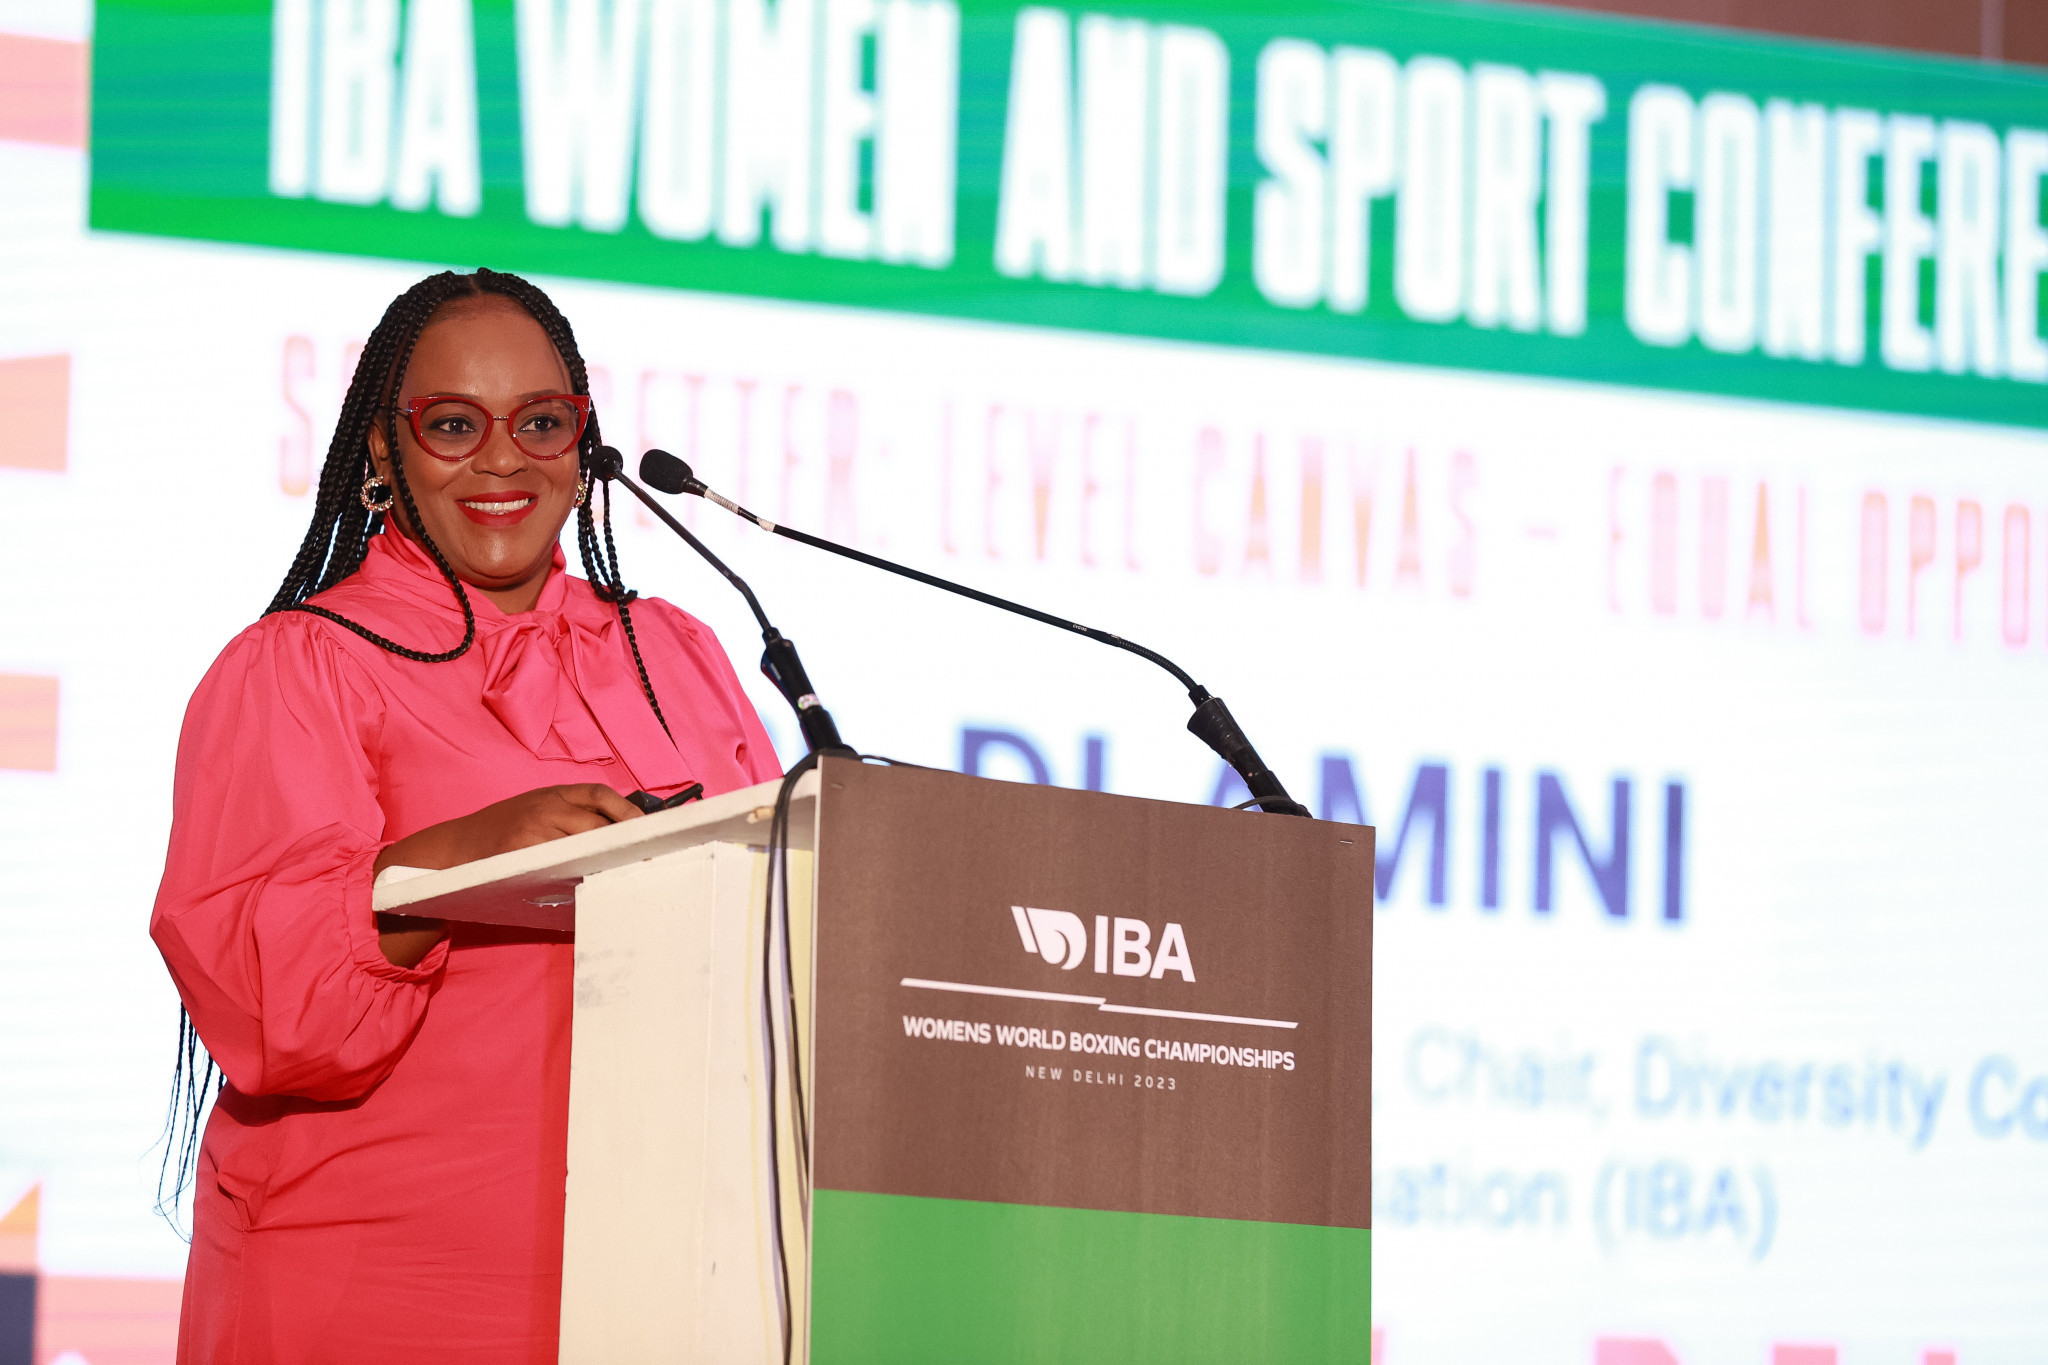 IBA Diversity Commission chair Pearl Dlamini said she was disappointed that just just 419 women are registered by the IBA as coaches compared to 8,400 men ©IBA